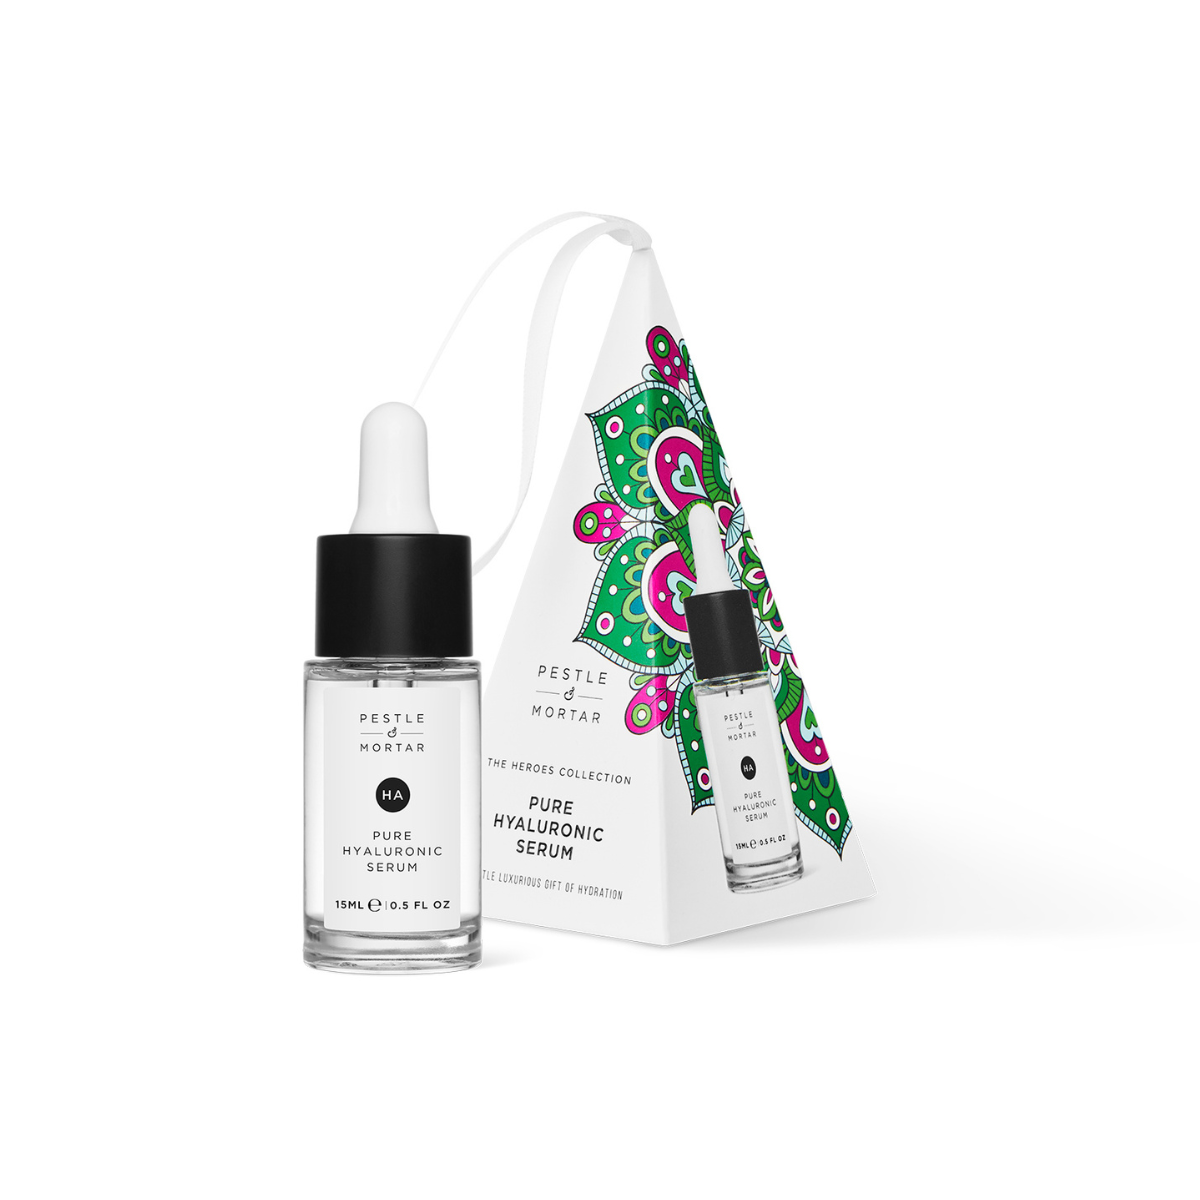 Pestle & Mortar The Heroes Collection - Pure Hyaluronic Serum 15ml